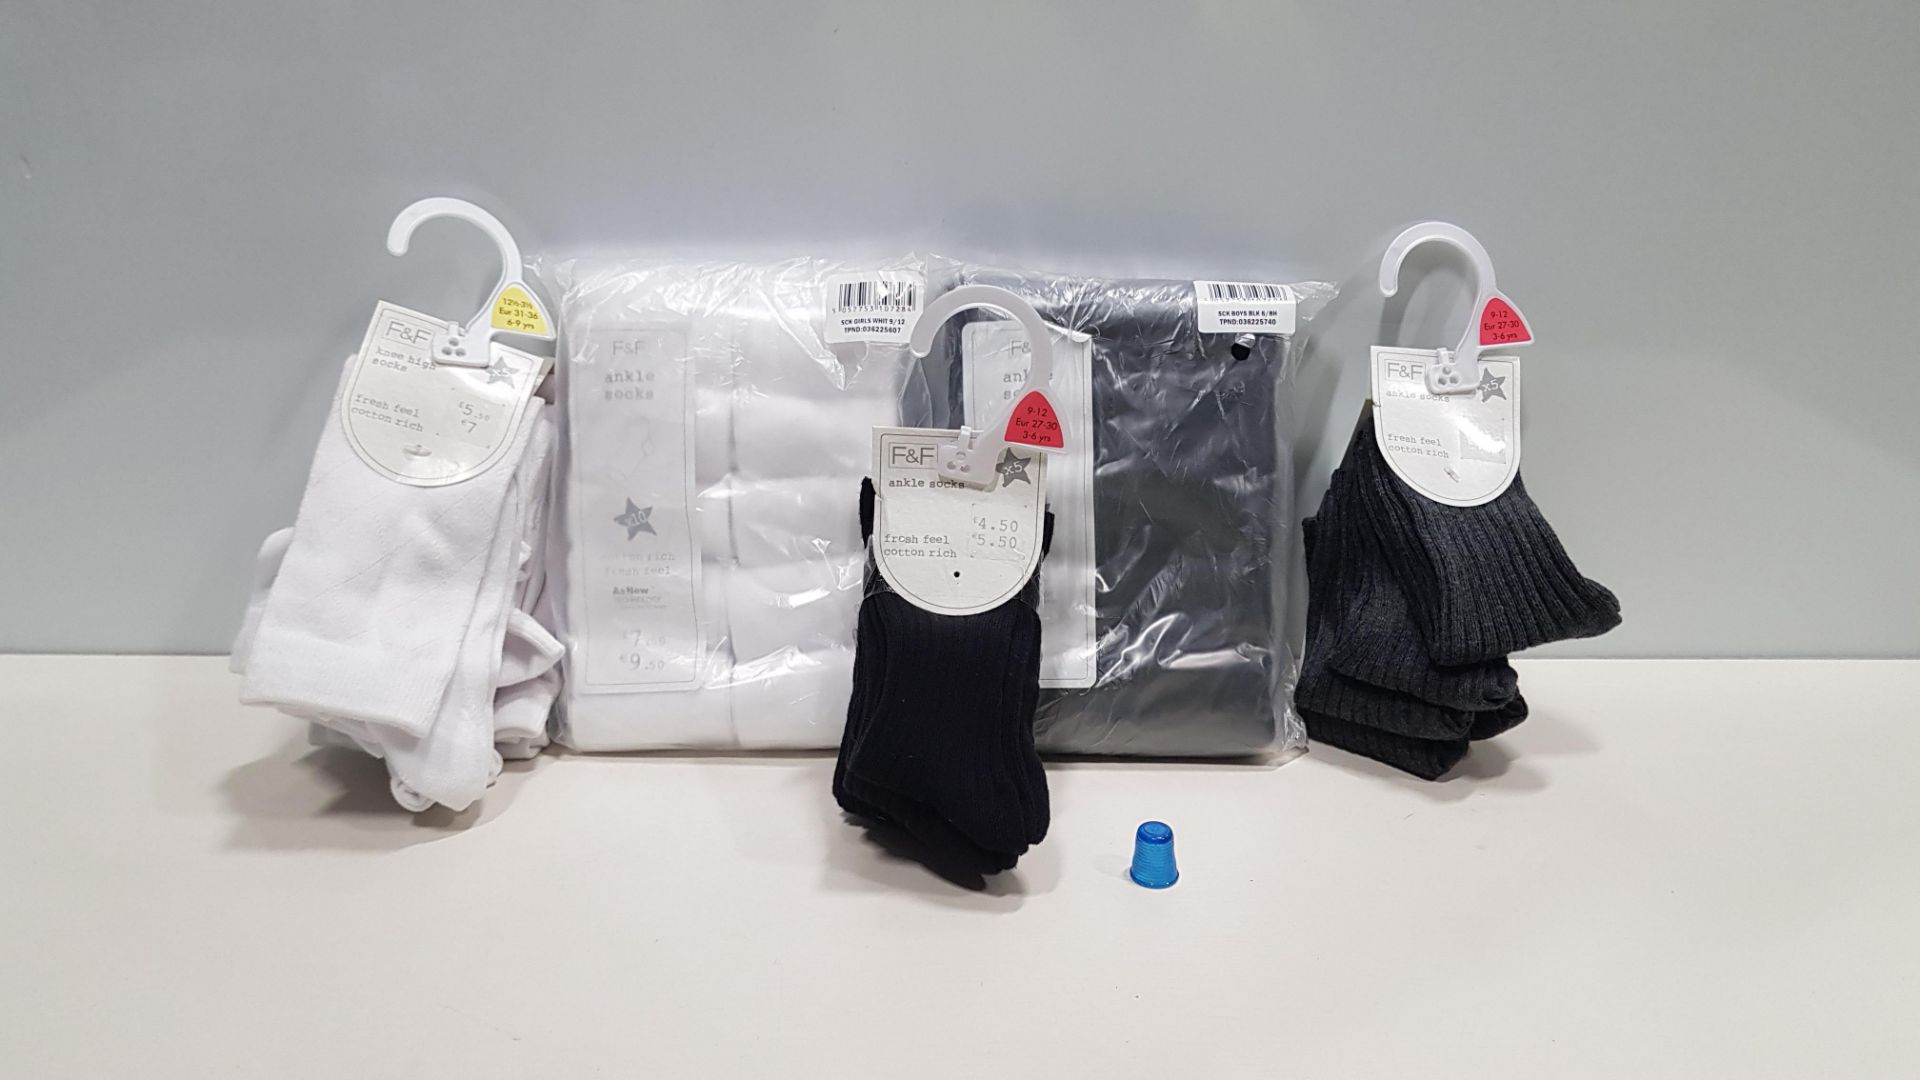 40 X BRAND NEW TESCO / F&F KIDS PACKS OF 3, 5 & 10 CONTAINING COTTON RICH SOCKS IN BLACK, GREY AND